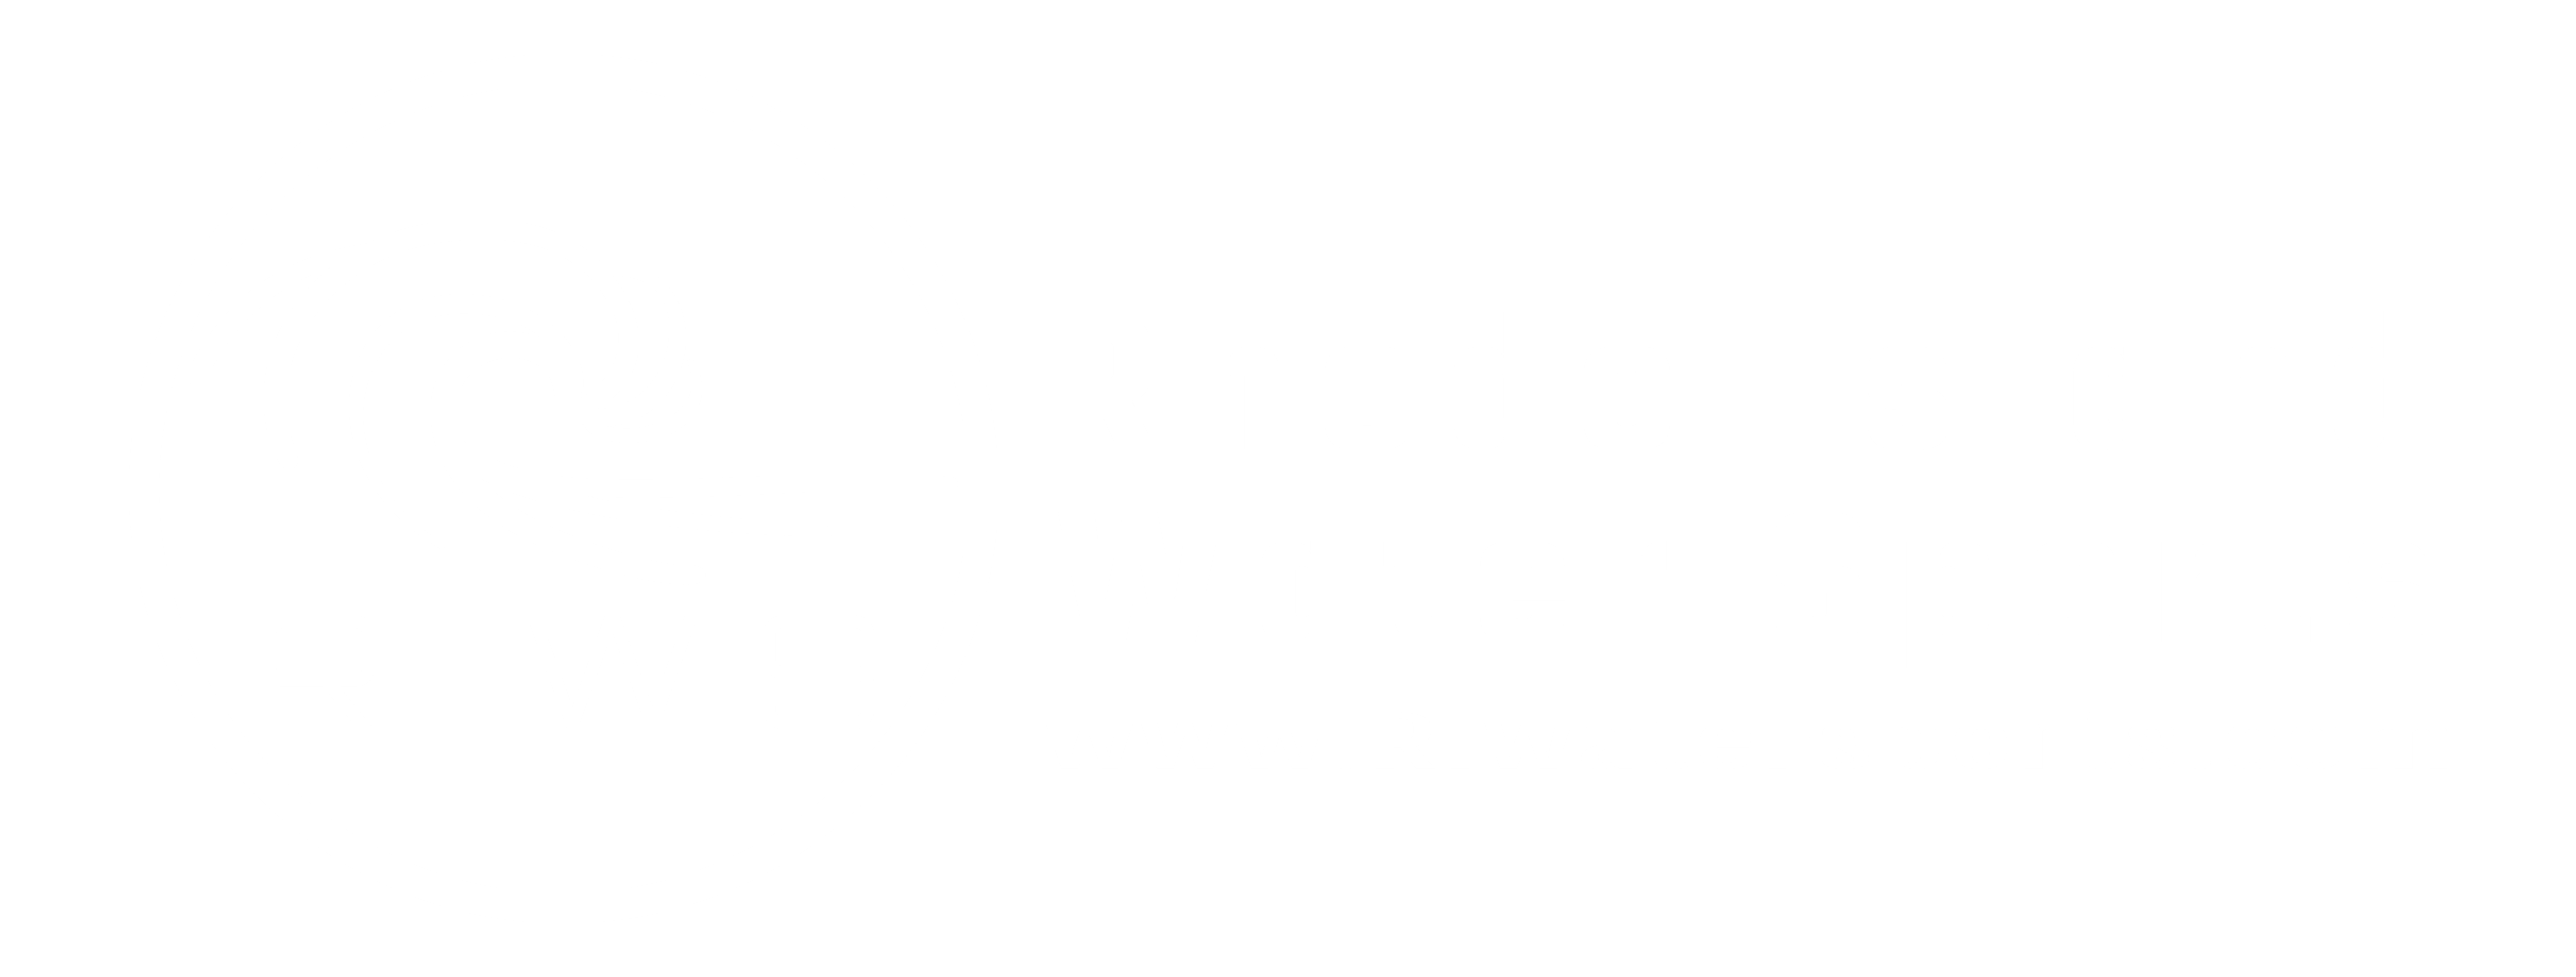 Rhode Island Water Sports is located in Oakland and our neighbors in Webster, Coventry, Burrillville, Providence, and Worcester